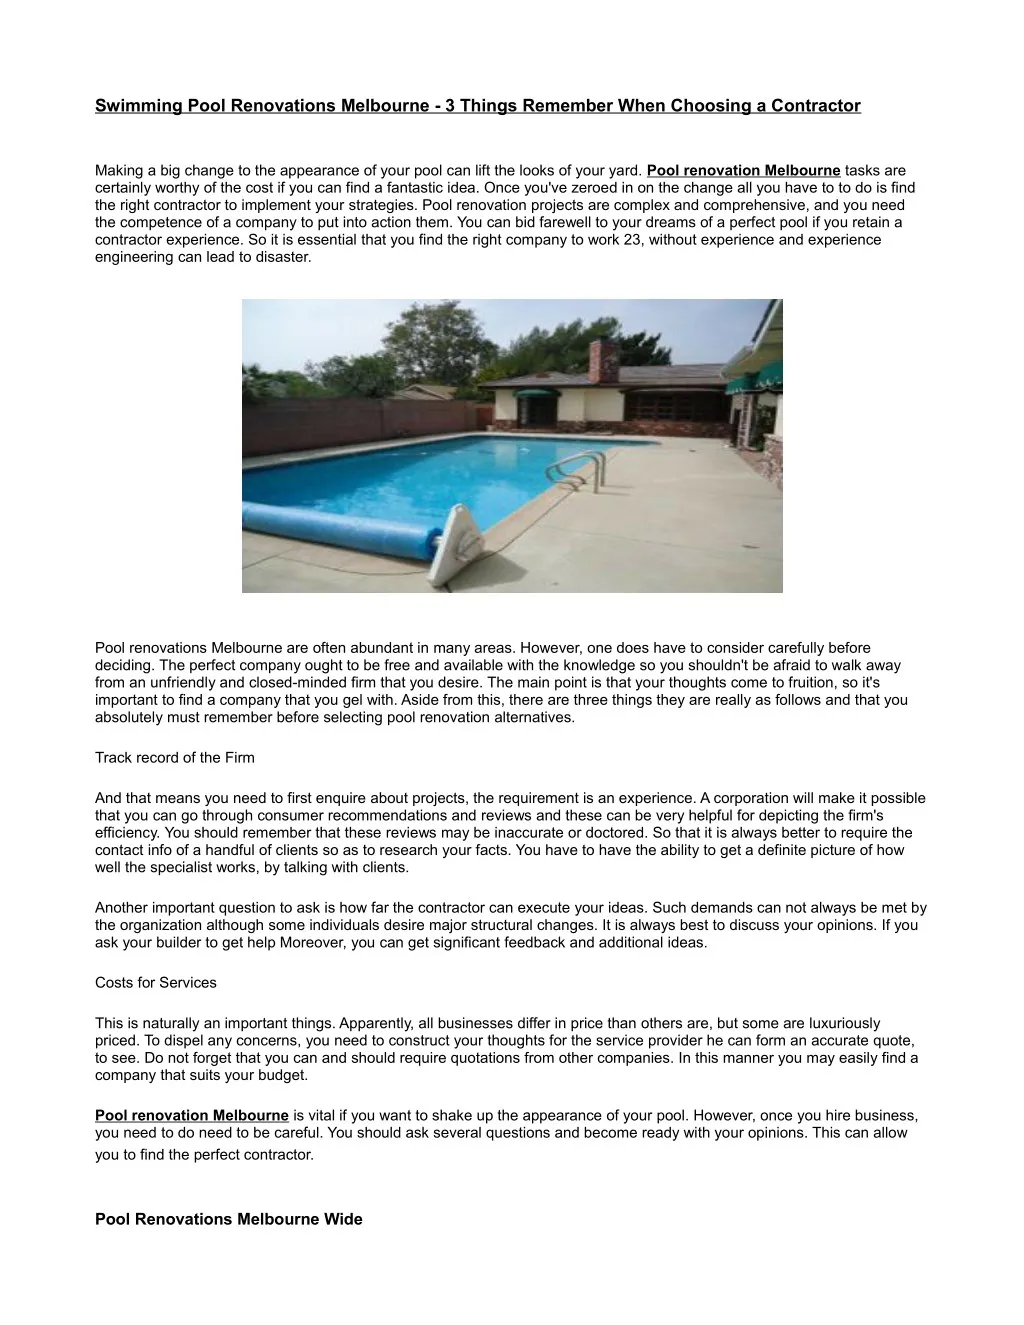 swimming pool renovations melbourne 3 things